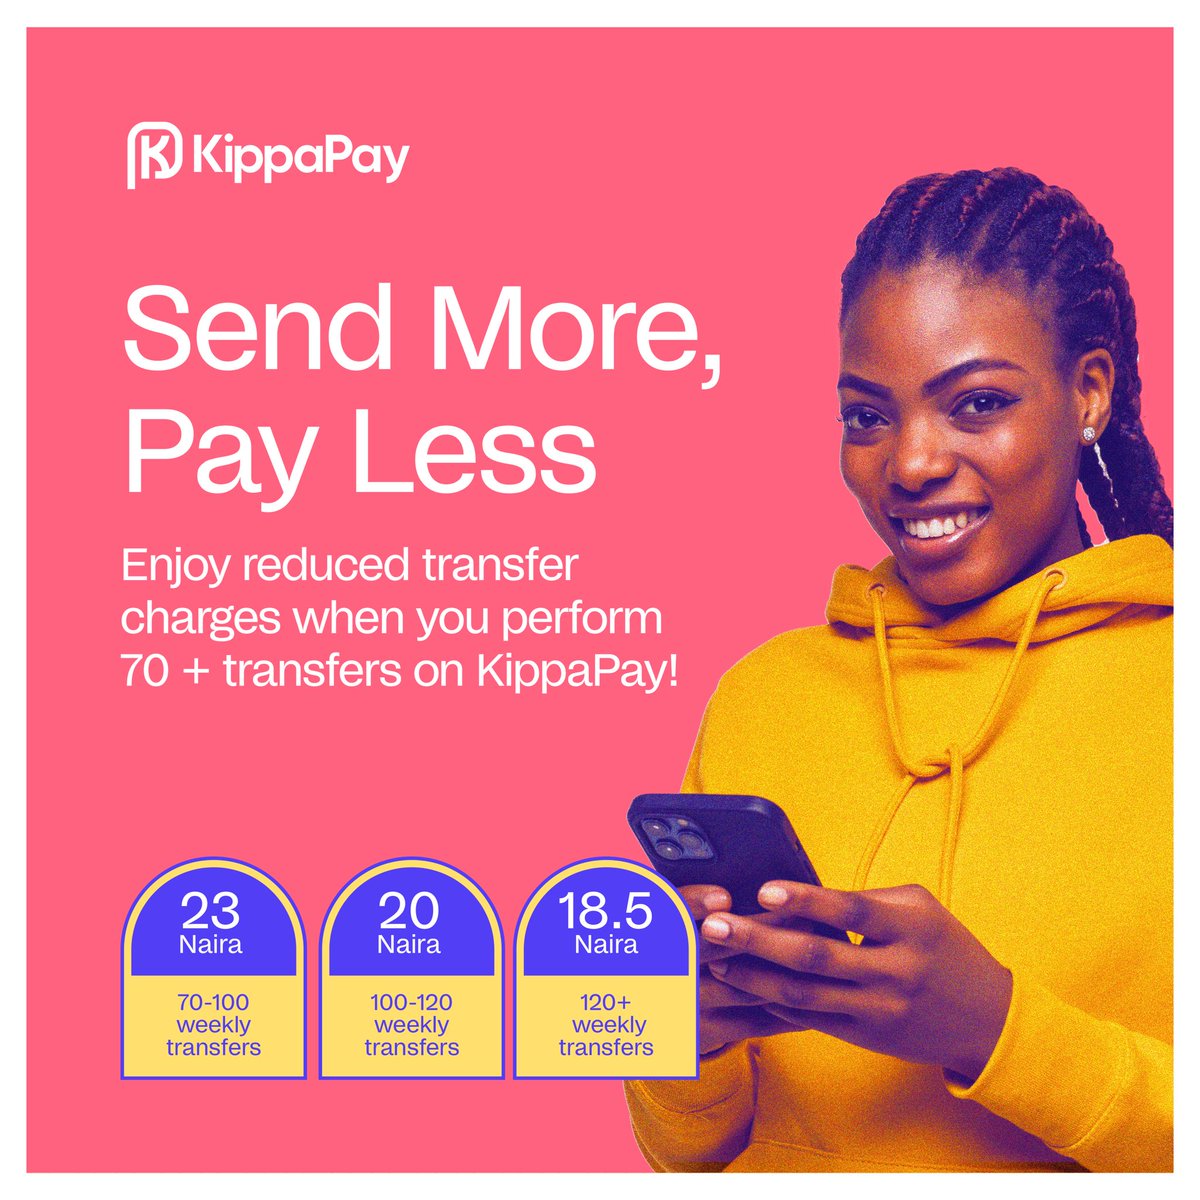 The more you transfer, the lower your charges. Depending on your transaction volume, you can transfer money to other banks for as low as 18.5 Naira. Don't miss out on this great offer. Start transferring now!